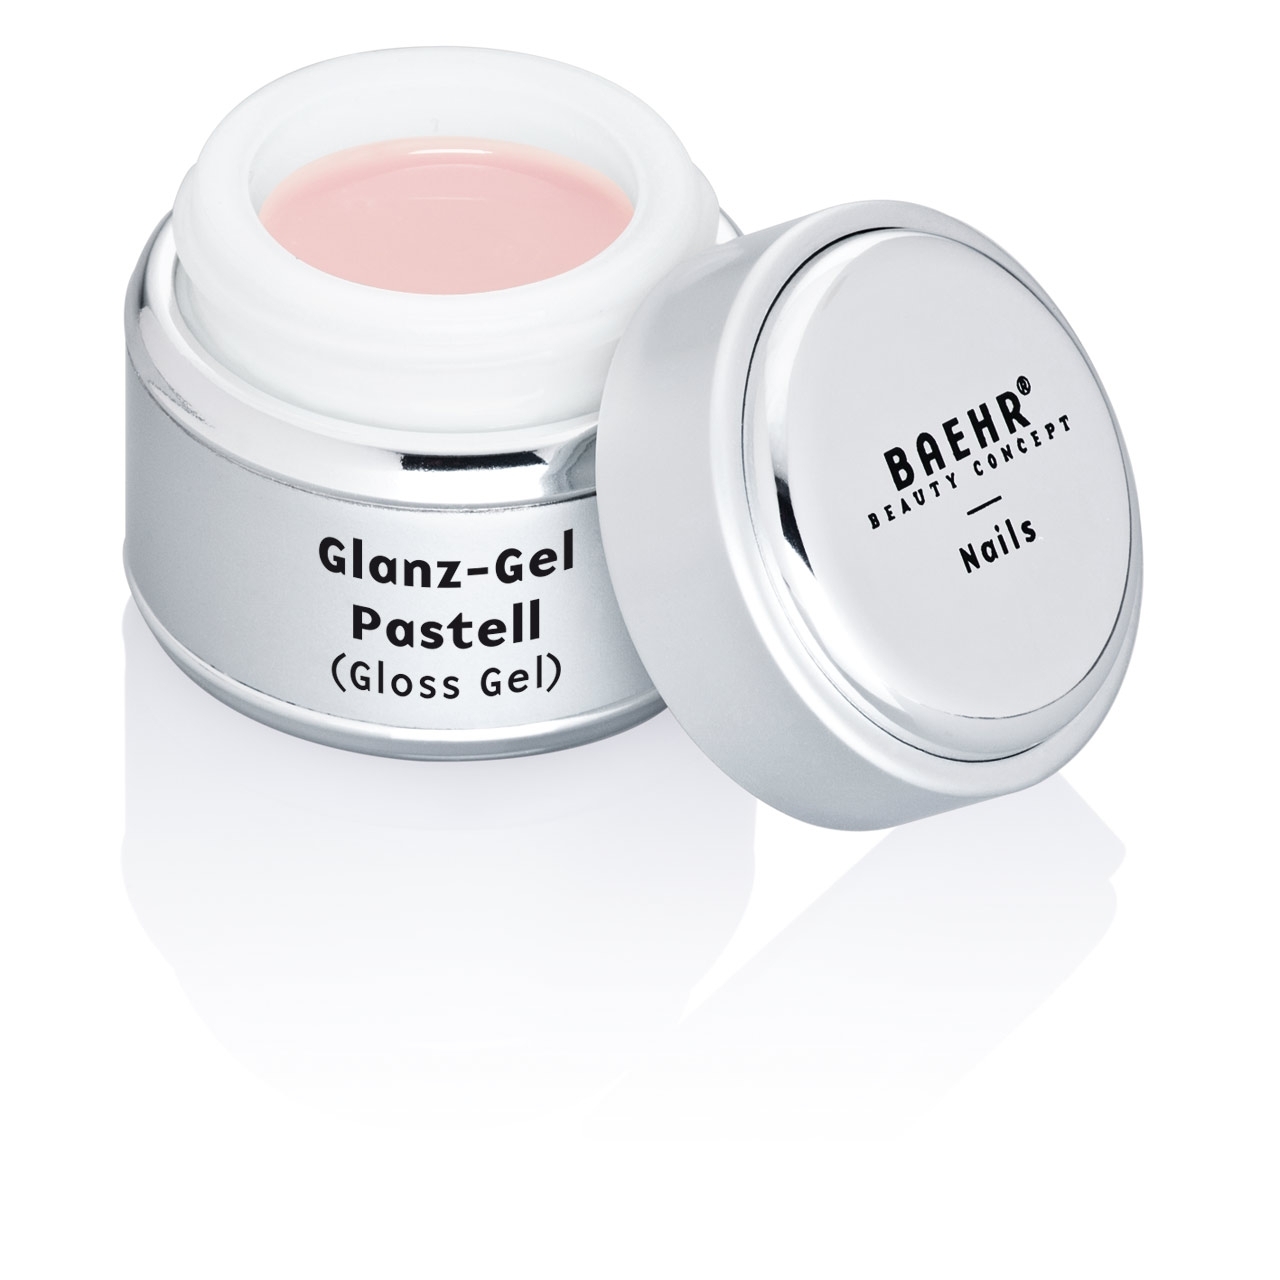 BAEHR BEAUTY CONCEPT - NAILS Glanz-Gel Pastell 15 ml